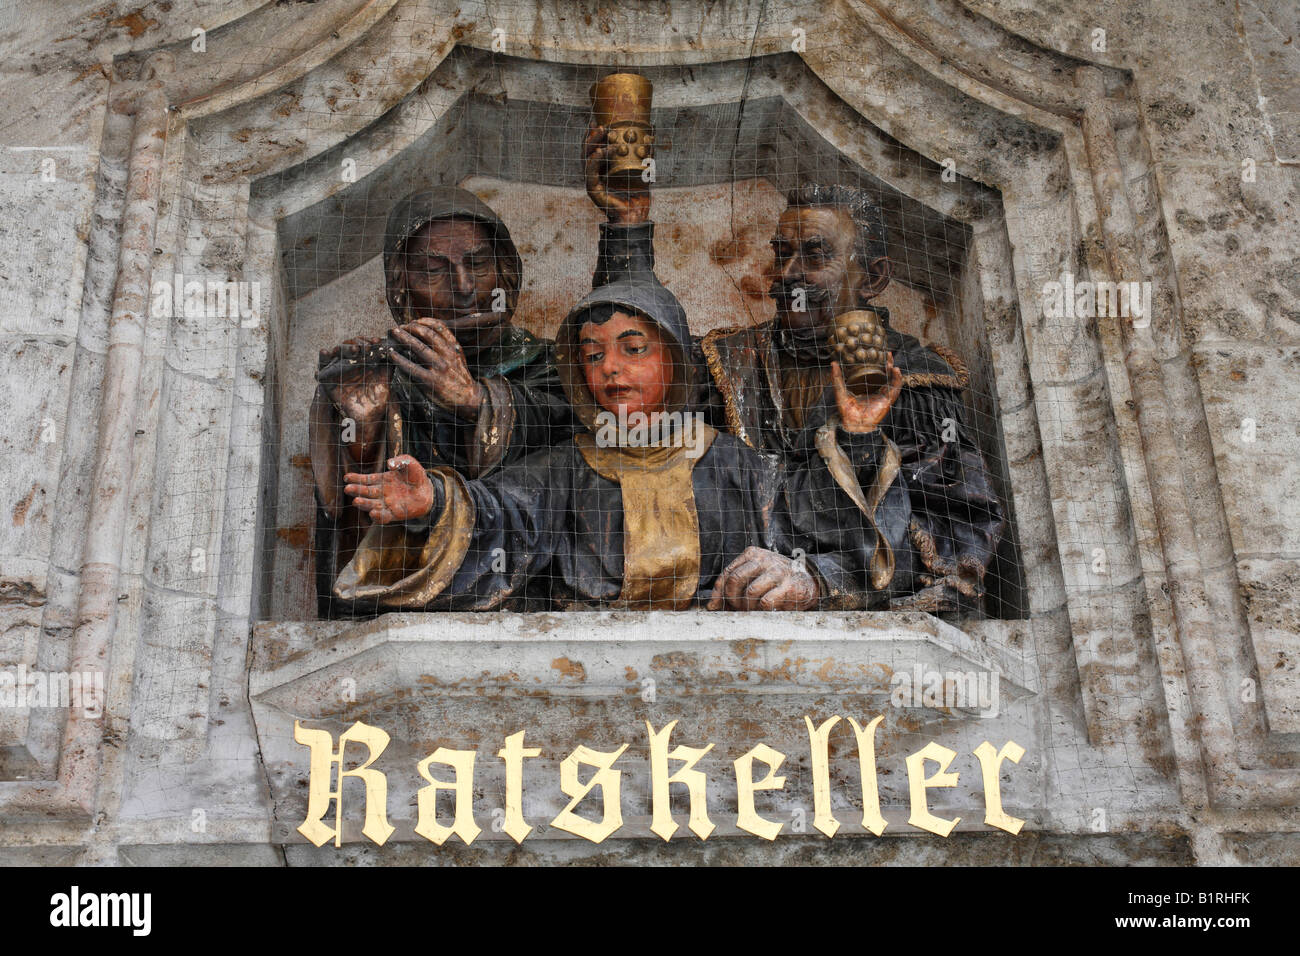 Group of figurines, Ratskeller, Neues Rathaus, New Town Hall, Munich, Bavaria, Germany, Europe Stock Photo